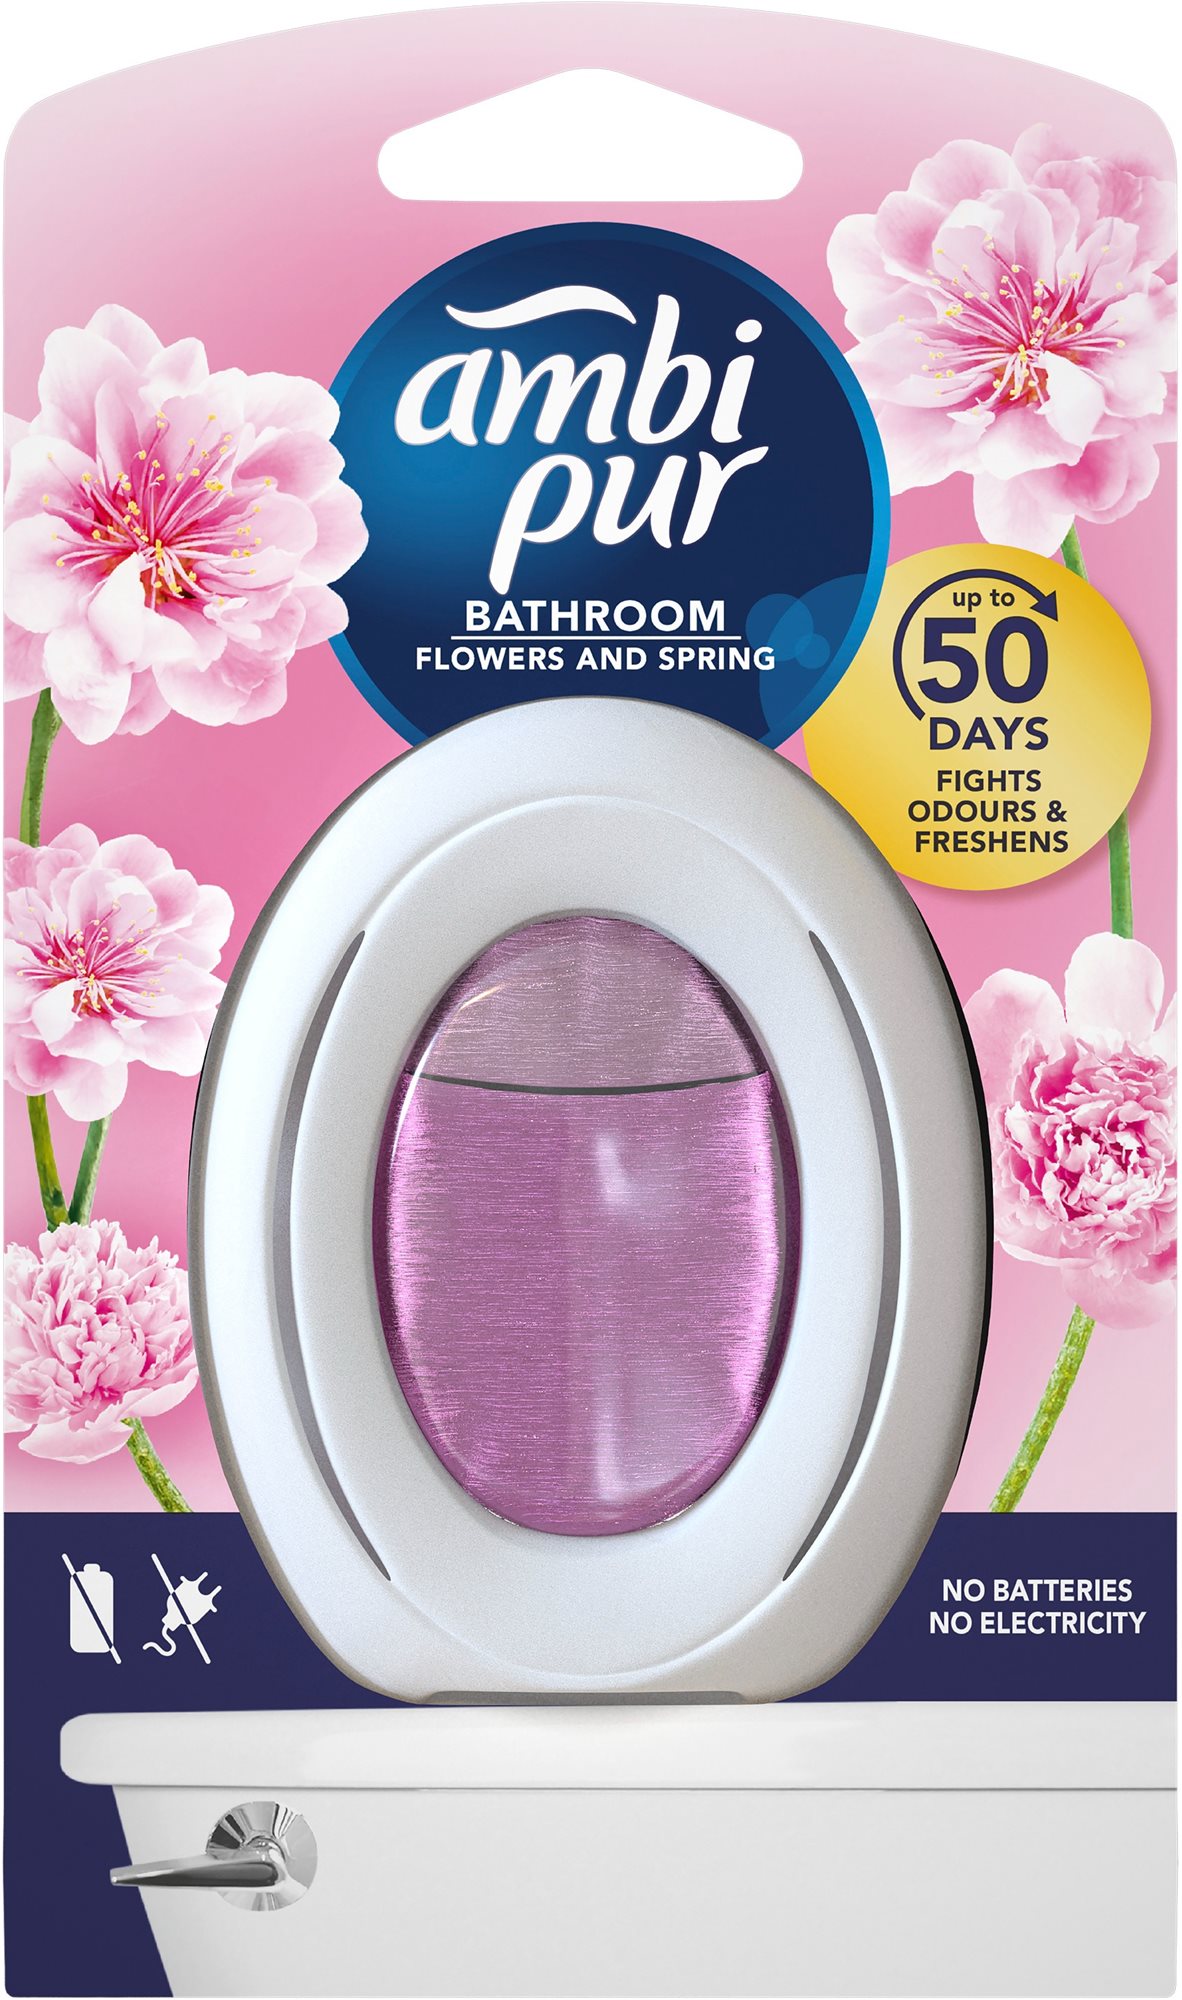 AMBI PUR Bathroom Flowers and Spring 7,5 ml